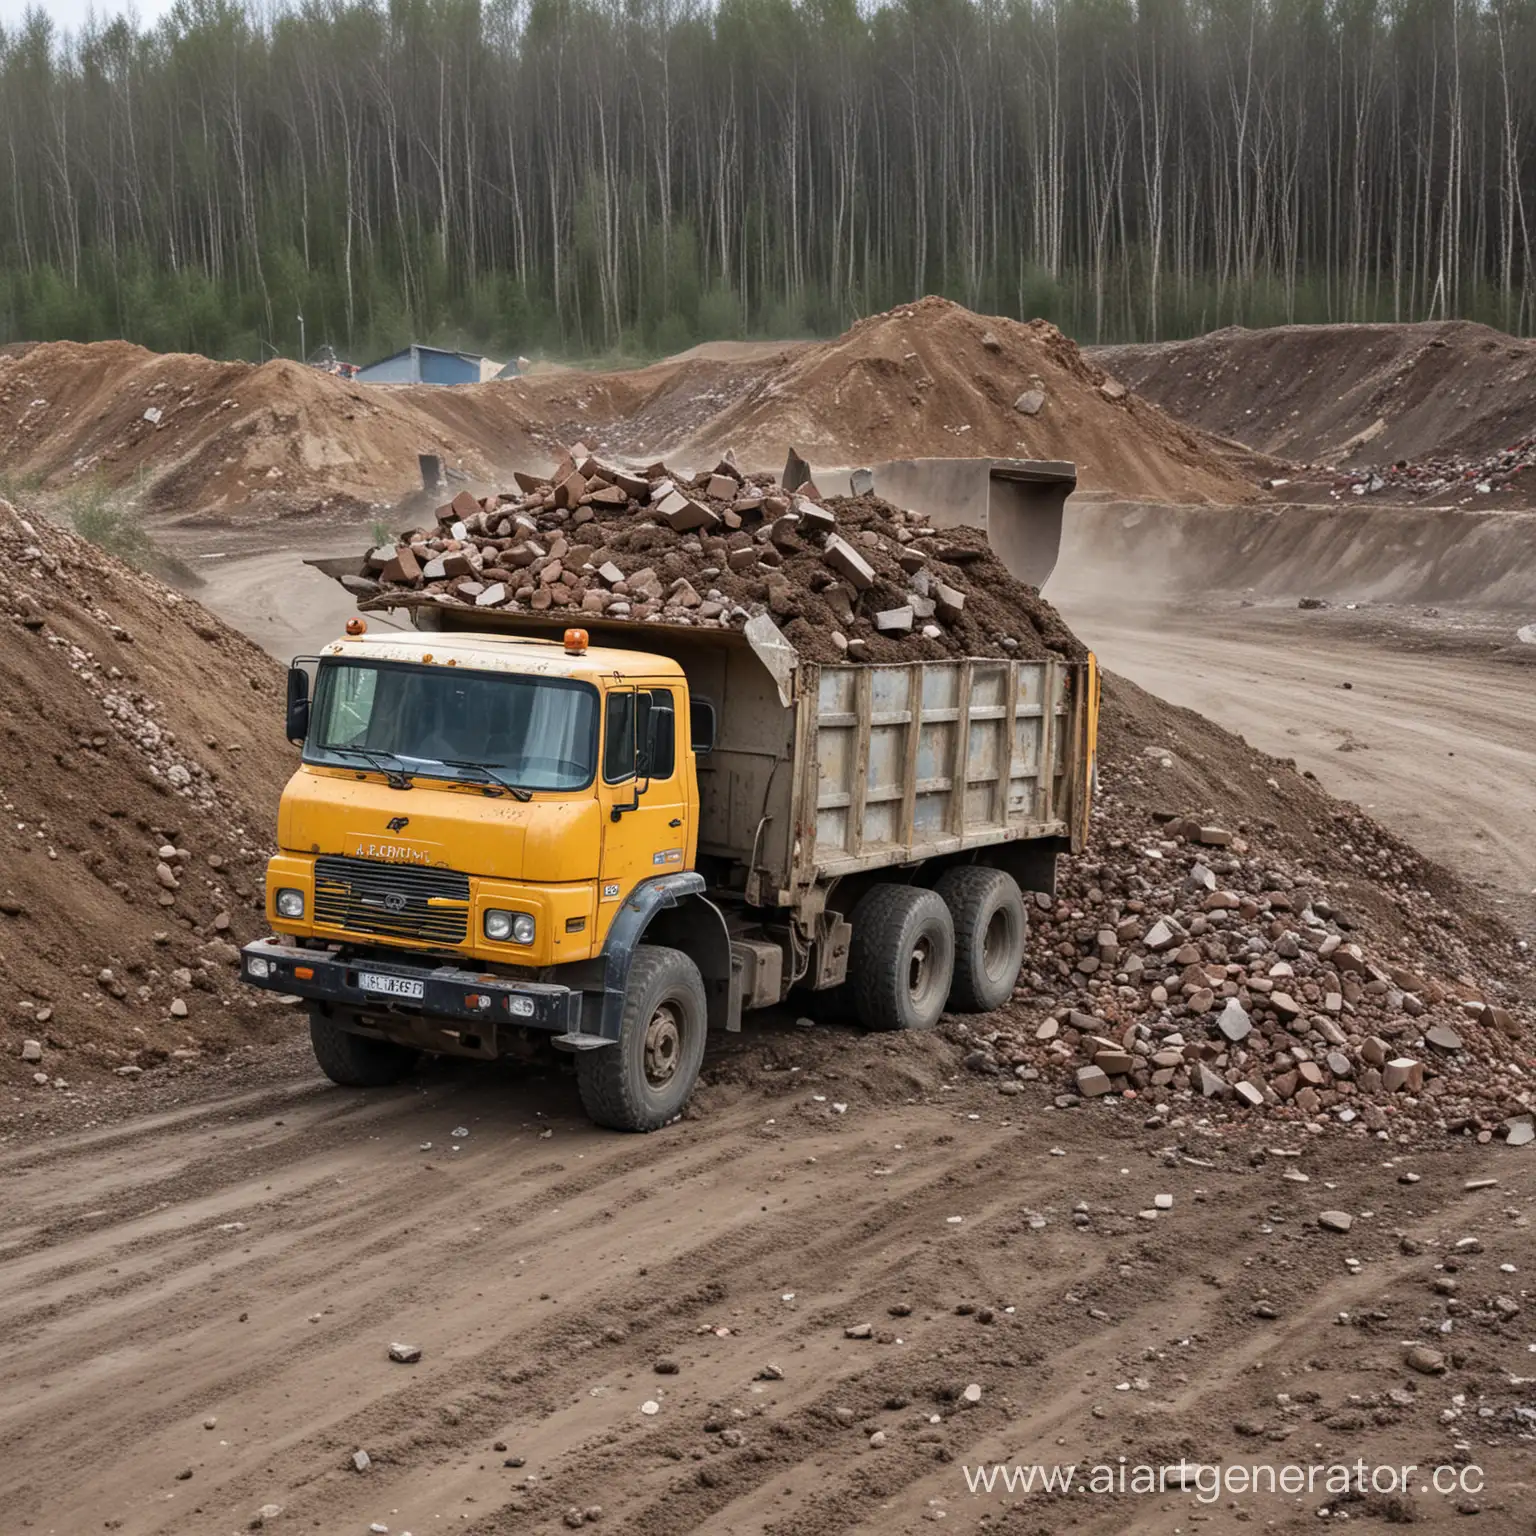 Construction-Waste-Removal-in-Russia-Dump-Truck-Action